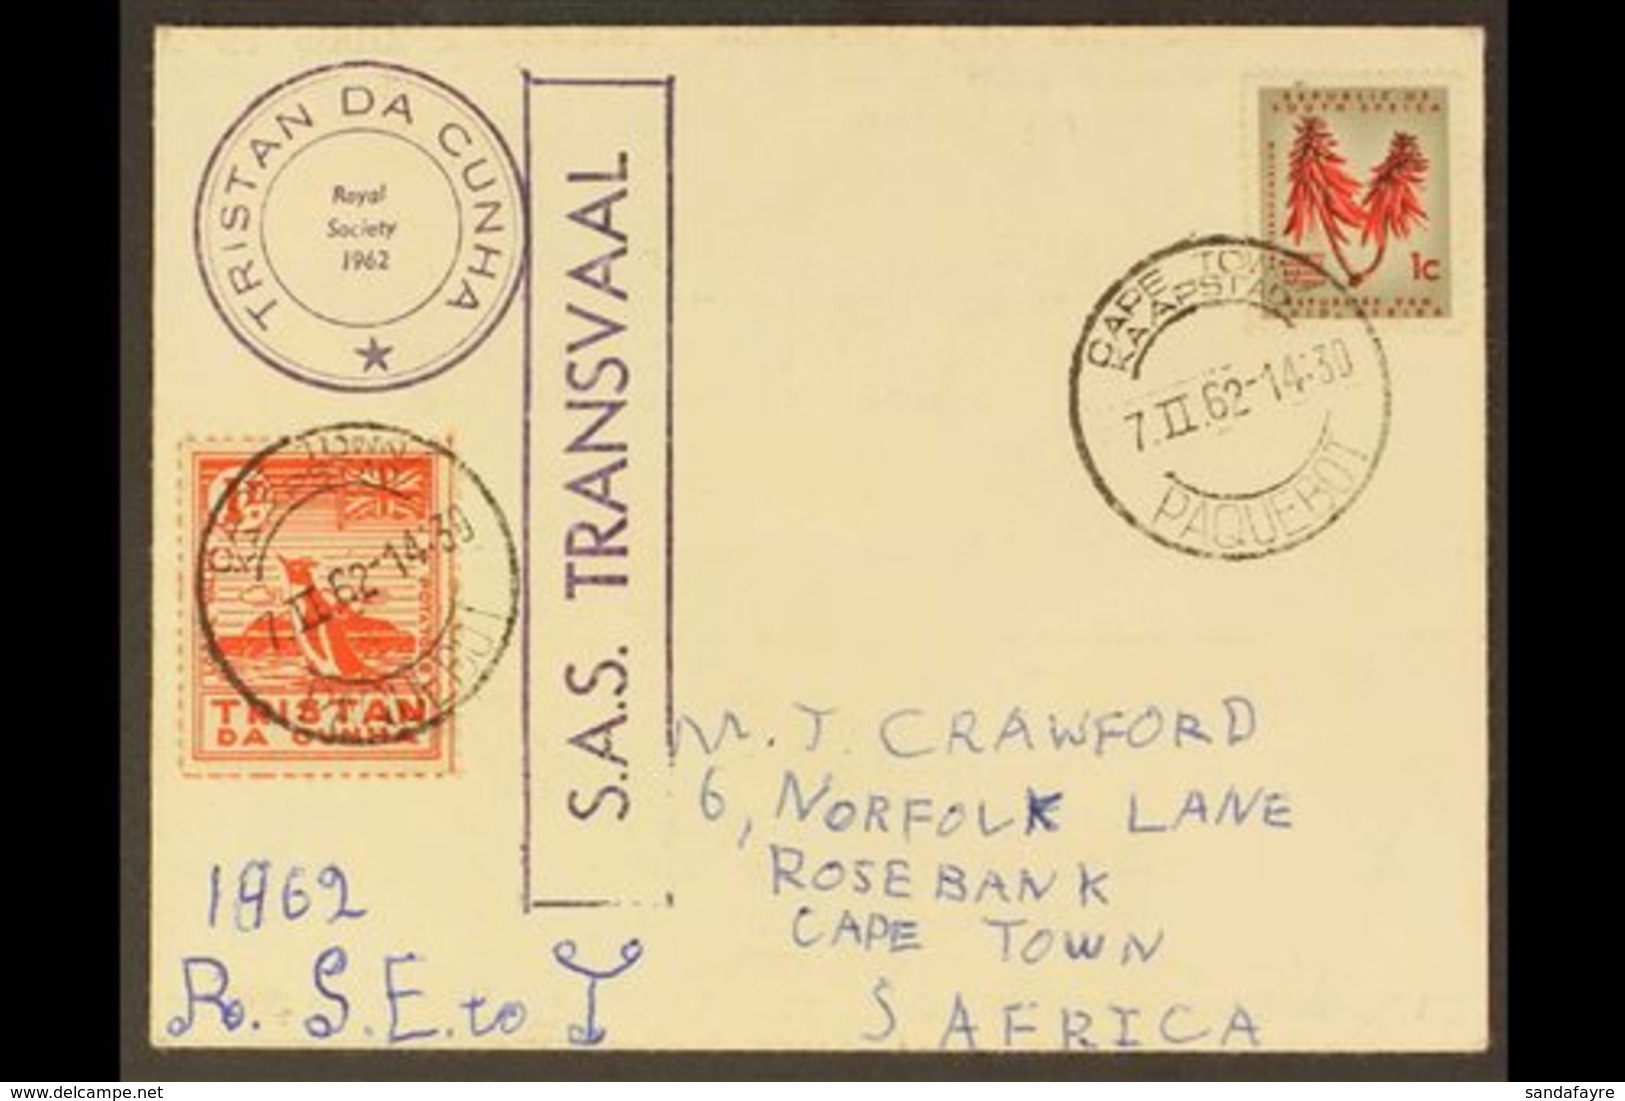 1962 "POTATO STAMP" COVER 1962 (7 FEB) To South Africa Bearing 1946 1d Red (4 Potatoes) Local Value Stamp Featuring Peng - Tristan Da Cunha